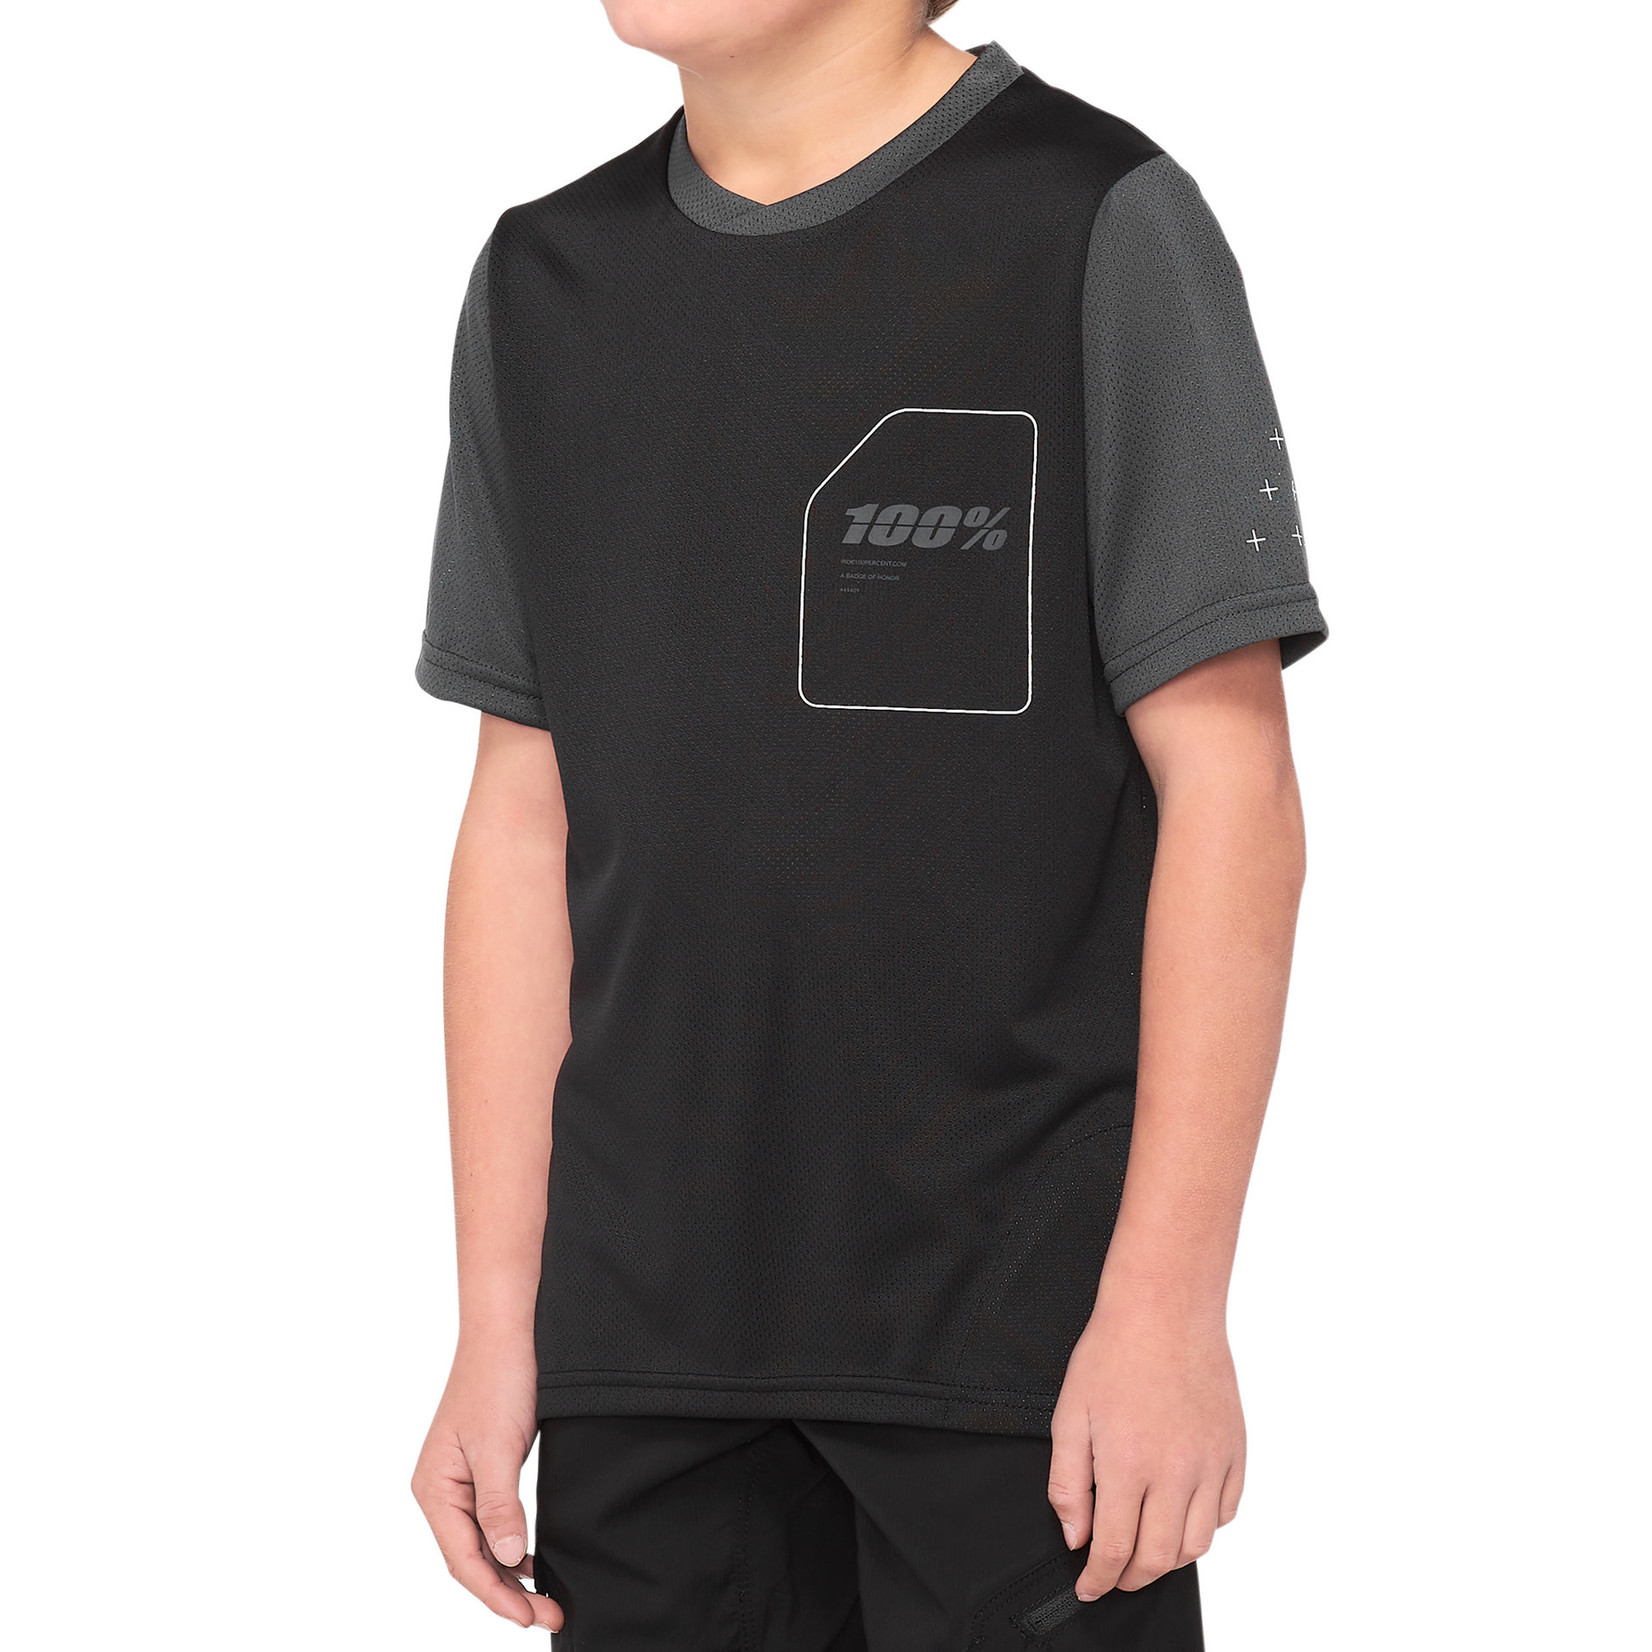 100 Percent 100% Ridecamp Youth Bike Jersey - Black/Charcoal Polyester Mesh Fabric